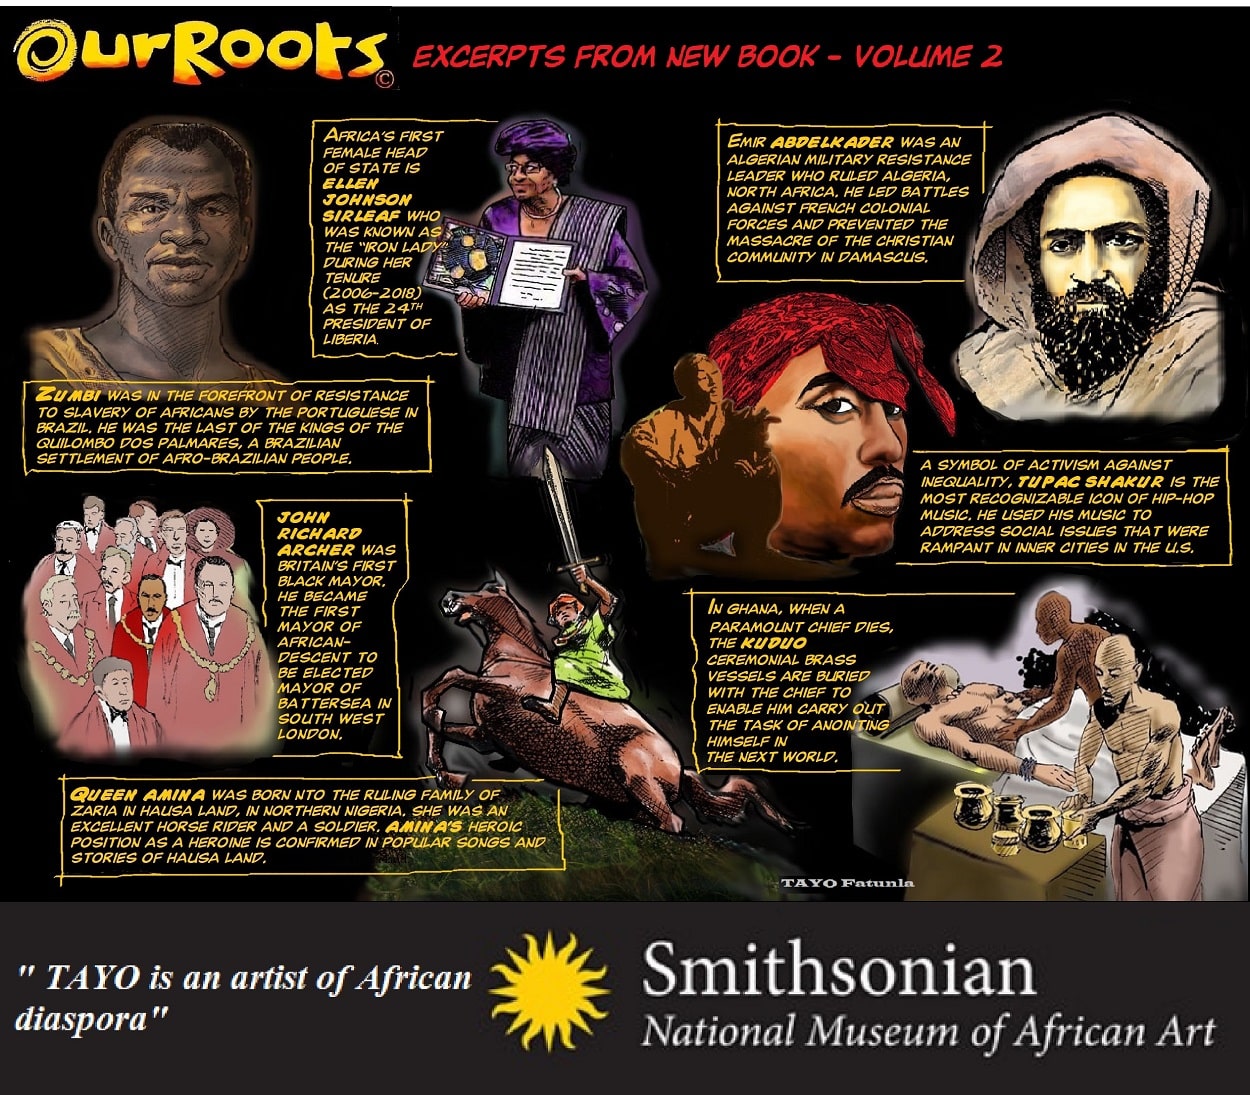 OUR ROOTS Volume 2 - Excerpts -